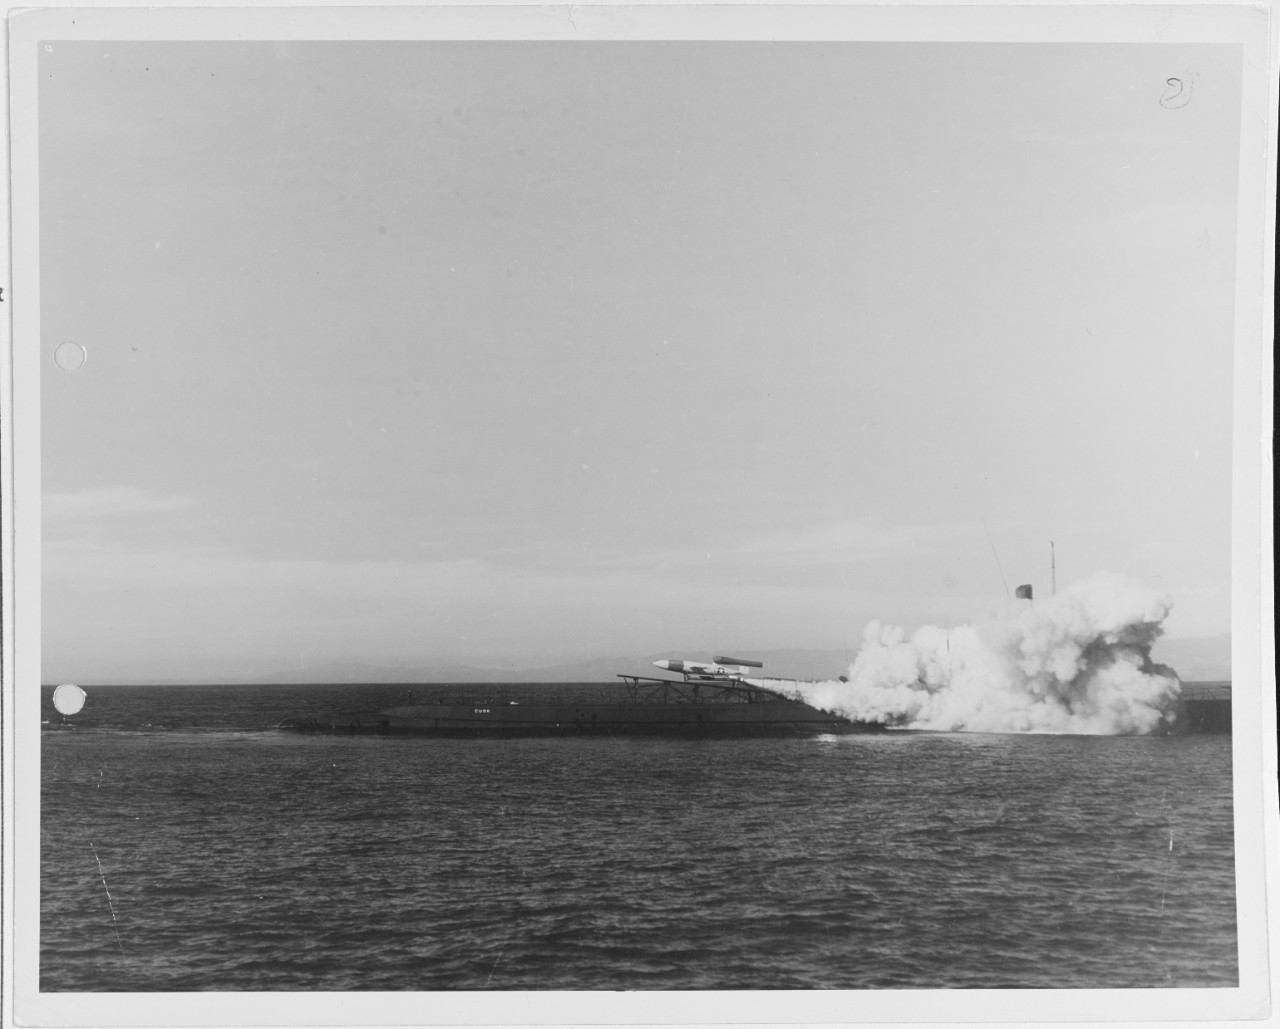 Launch of a Loon missile from USS CUSK (SS-348)